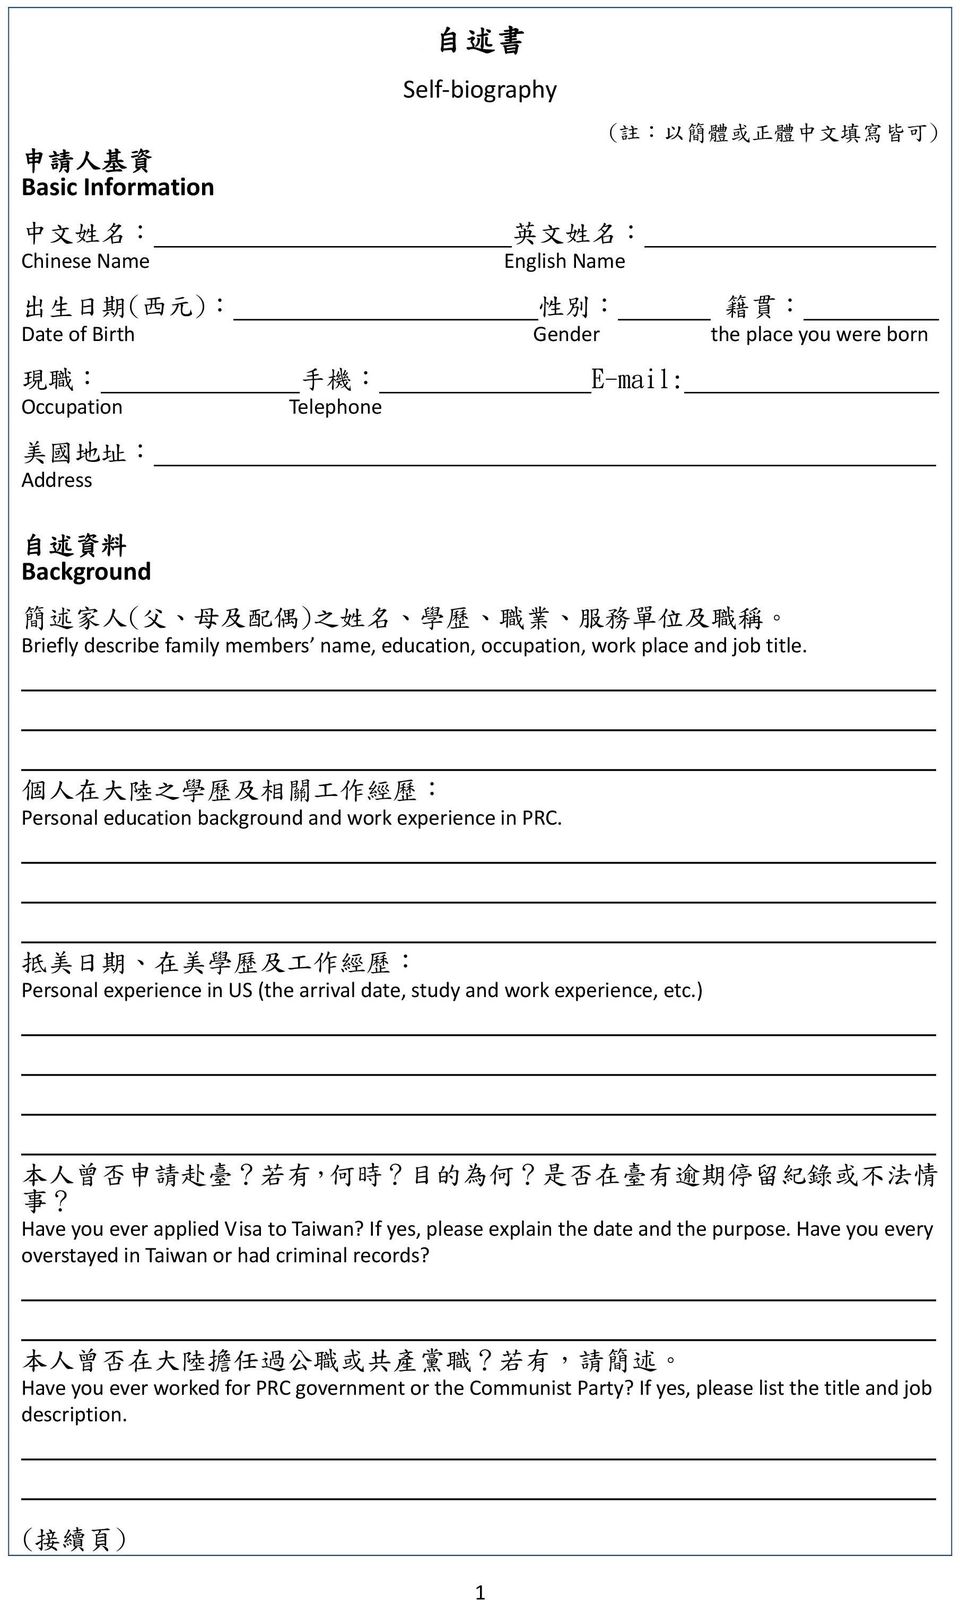 place and job title. 個 人 在 大 陸 之 學 歷 及 相 關 工 作 經 歷 : Personal education background and work experience in PRC.